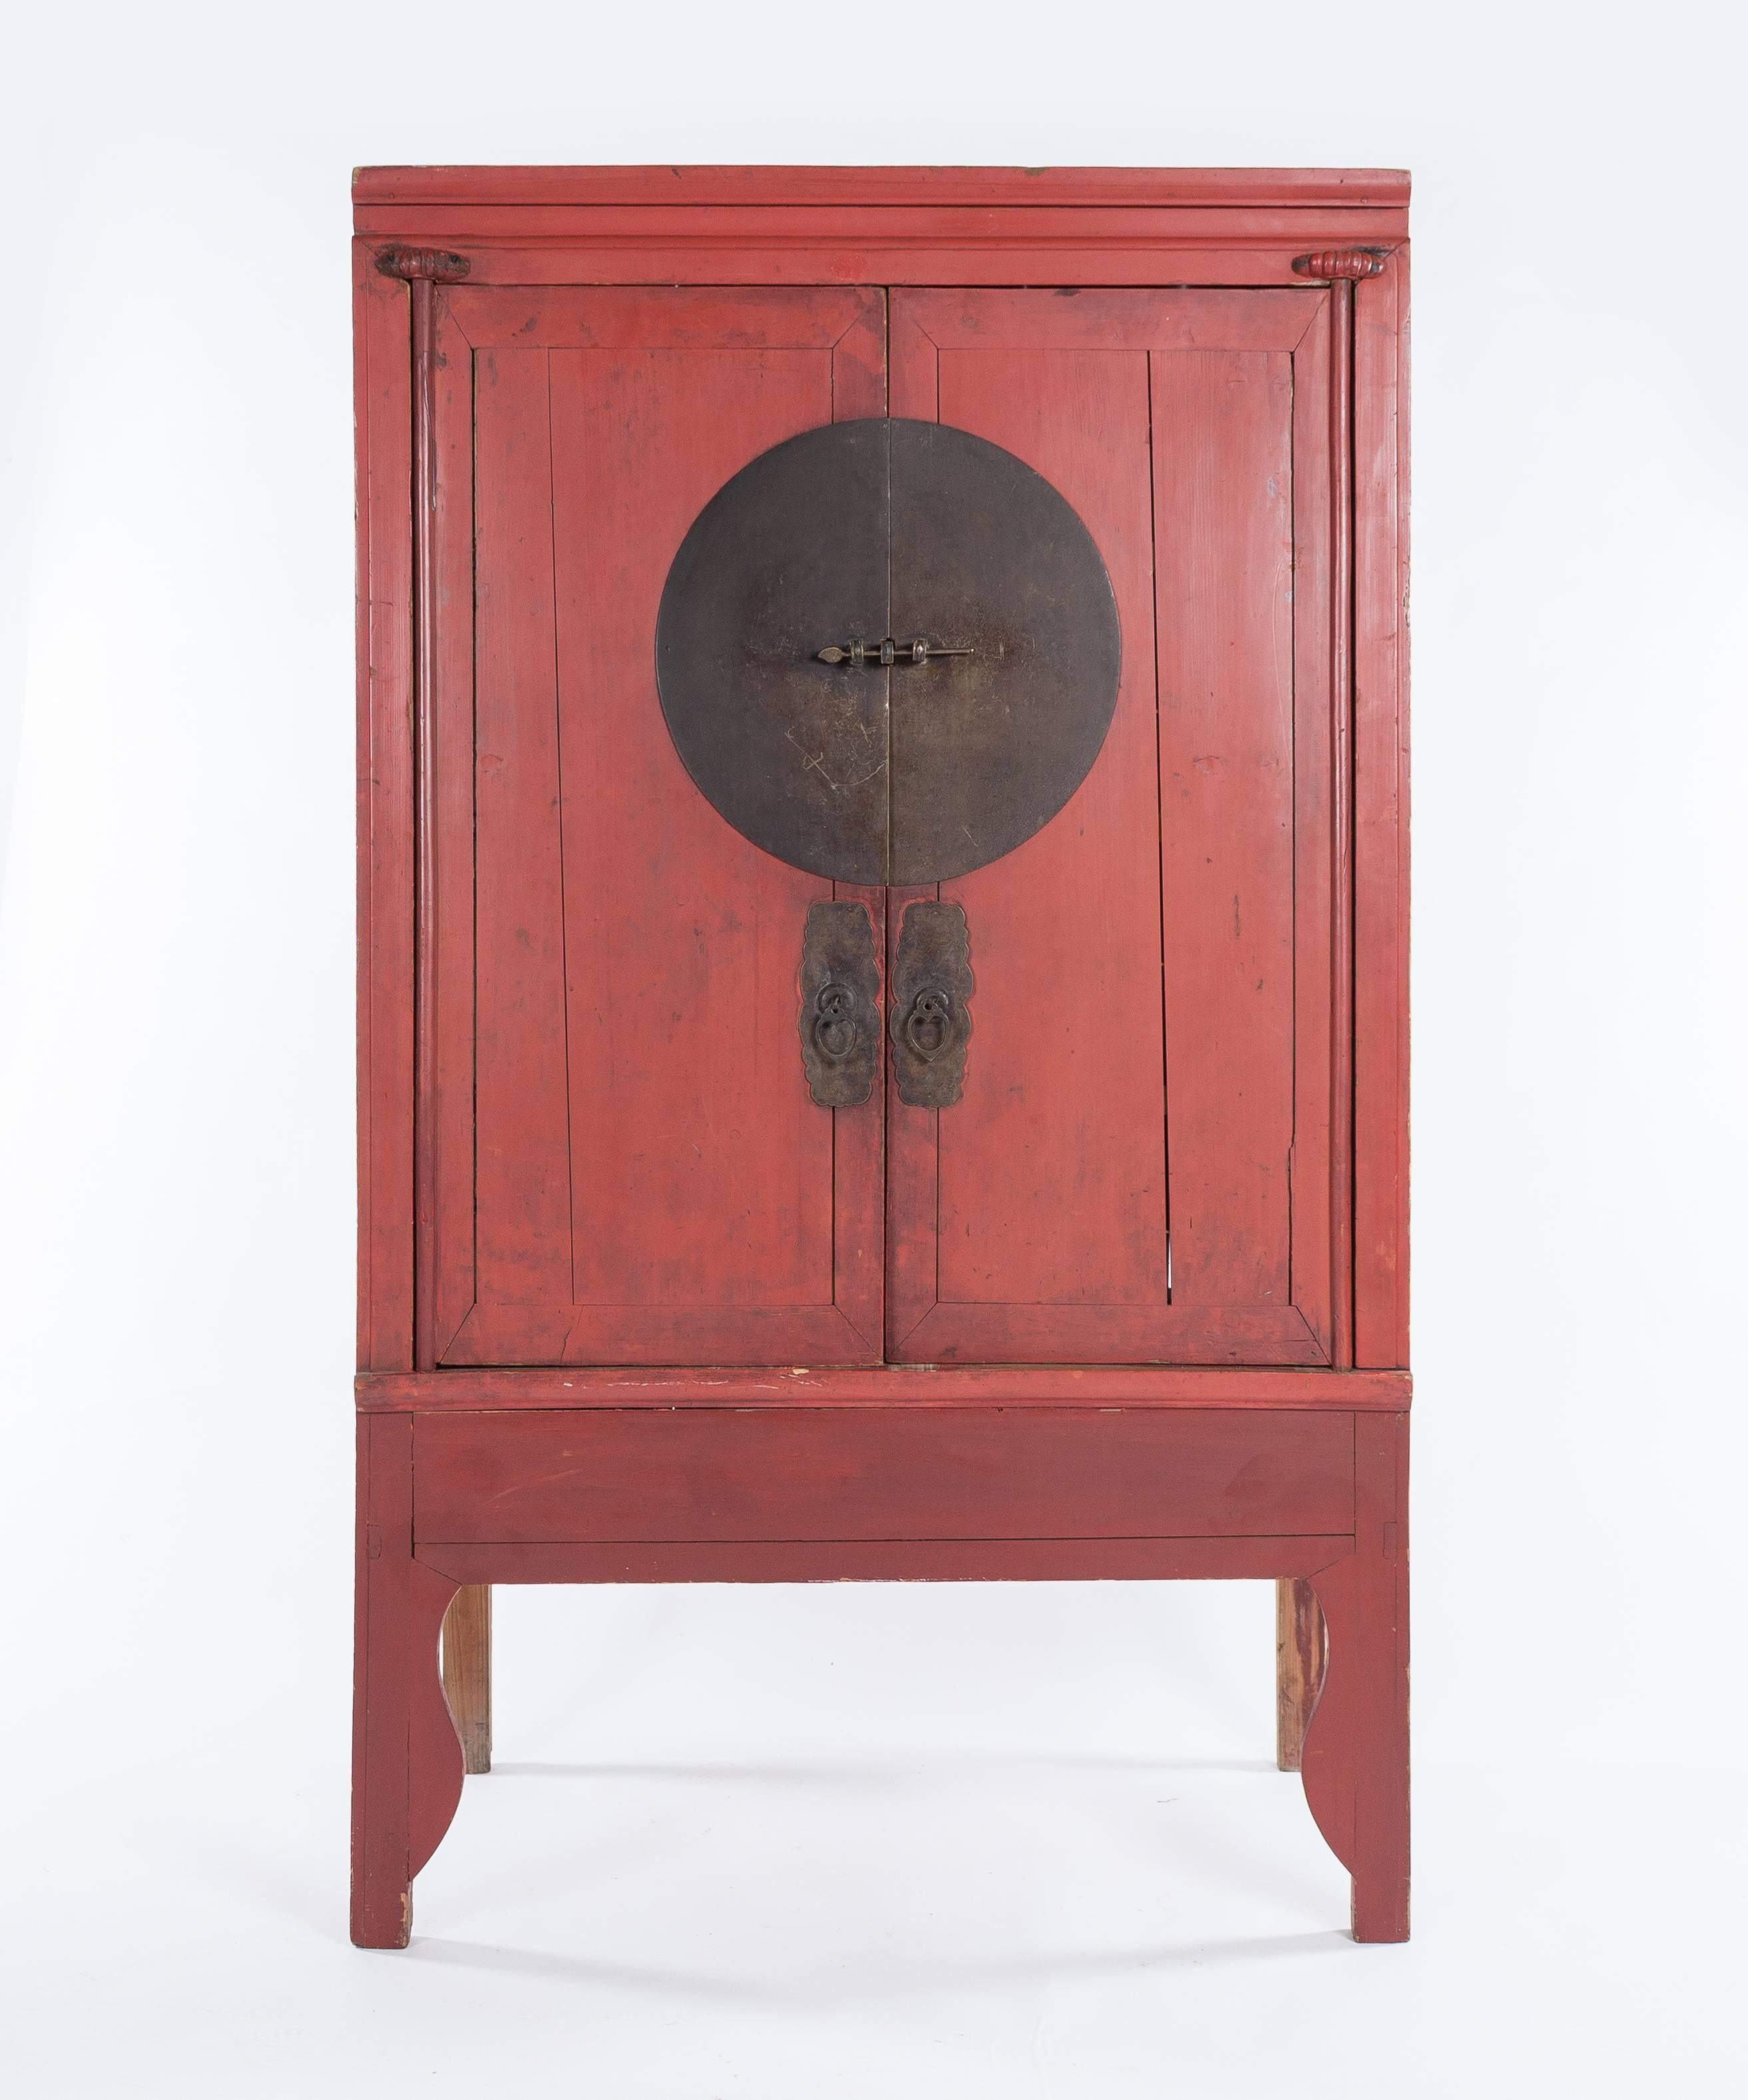 A pair of antique red lacquer Ming-style Chinese wardrobes dating to the second quarter of the 20th century. One wardrobe measures approximately 42